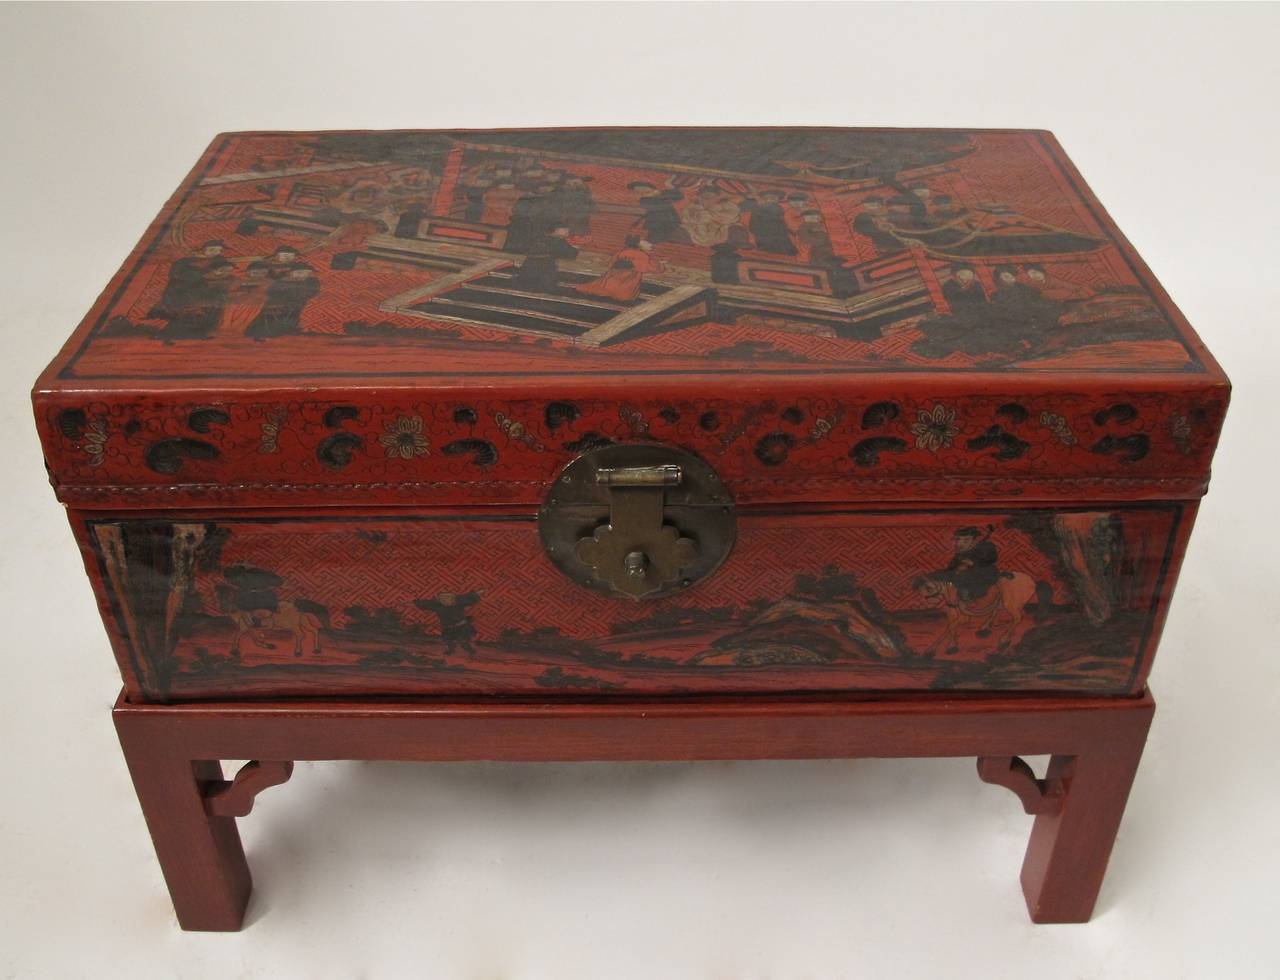 Unusual pigskin trunk with embossing and hand painted garden pavillion court scenes on red lacquered ground. Custom made later stand. Chinese Qing Dynasty (late 19th century).